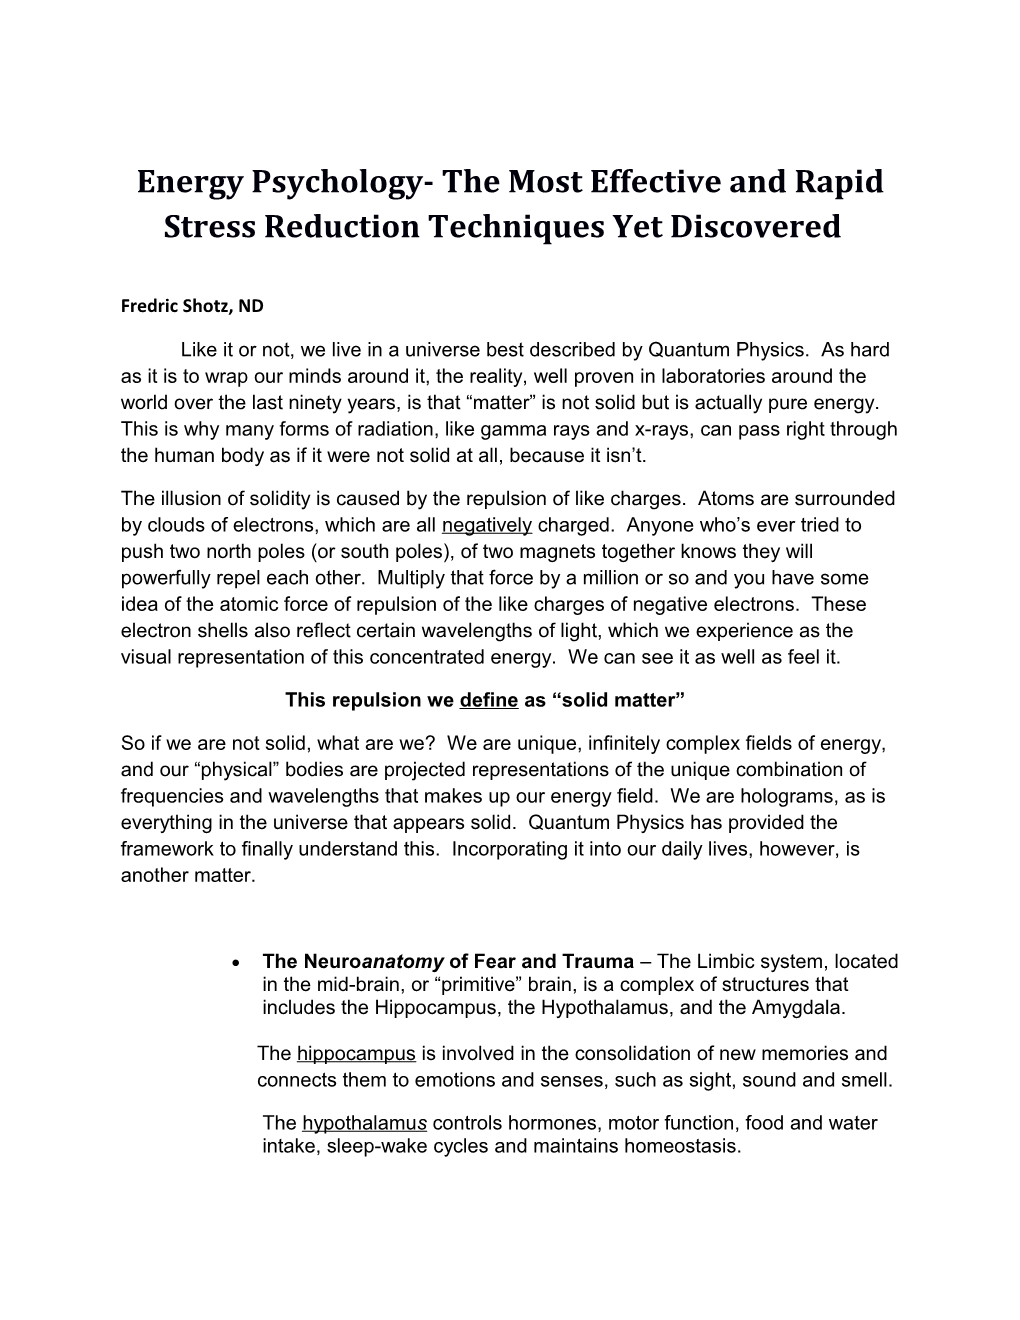 Energy Psychology- the Most Effective and Rapid Stress Reduction Techniques Yet Discovered